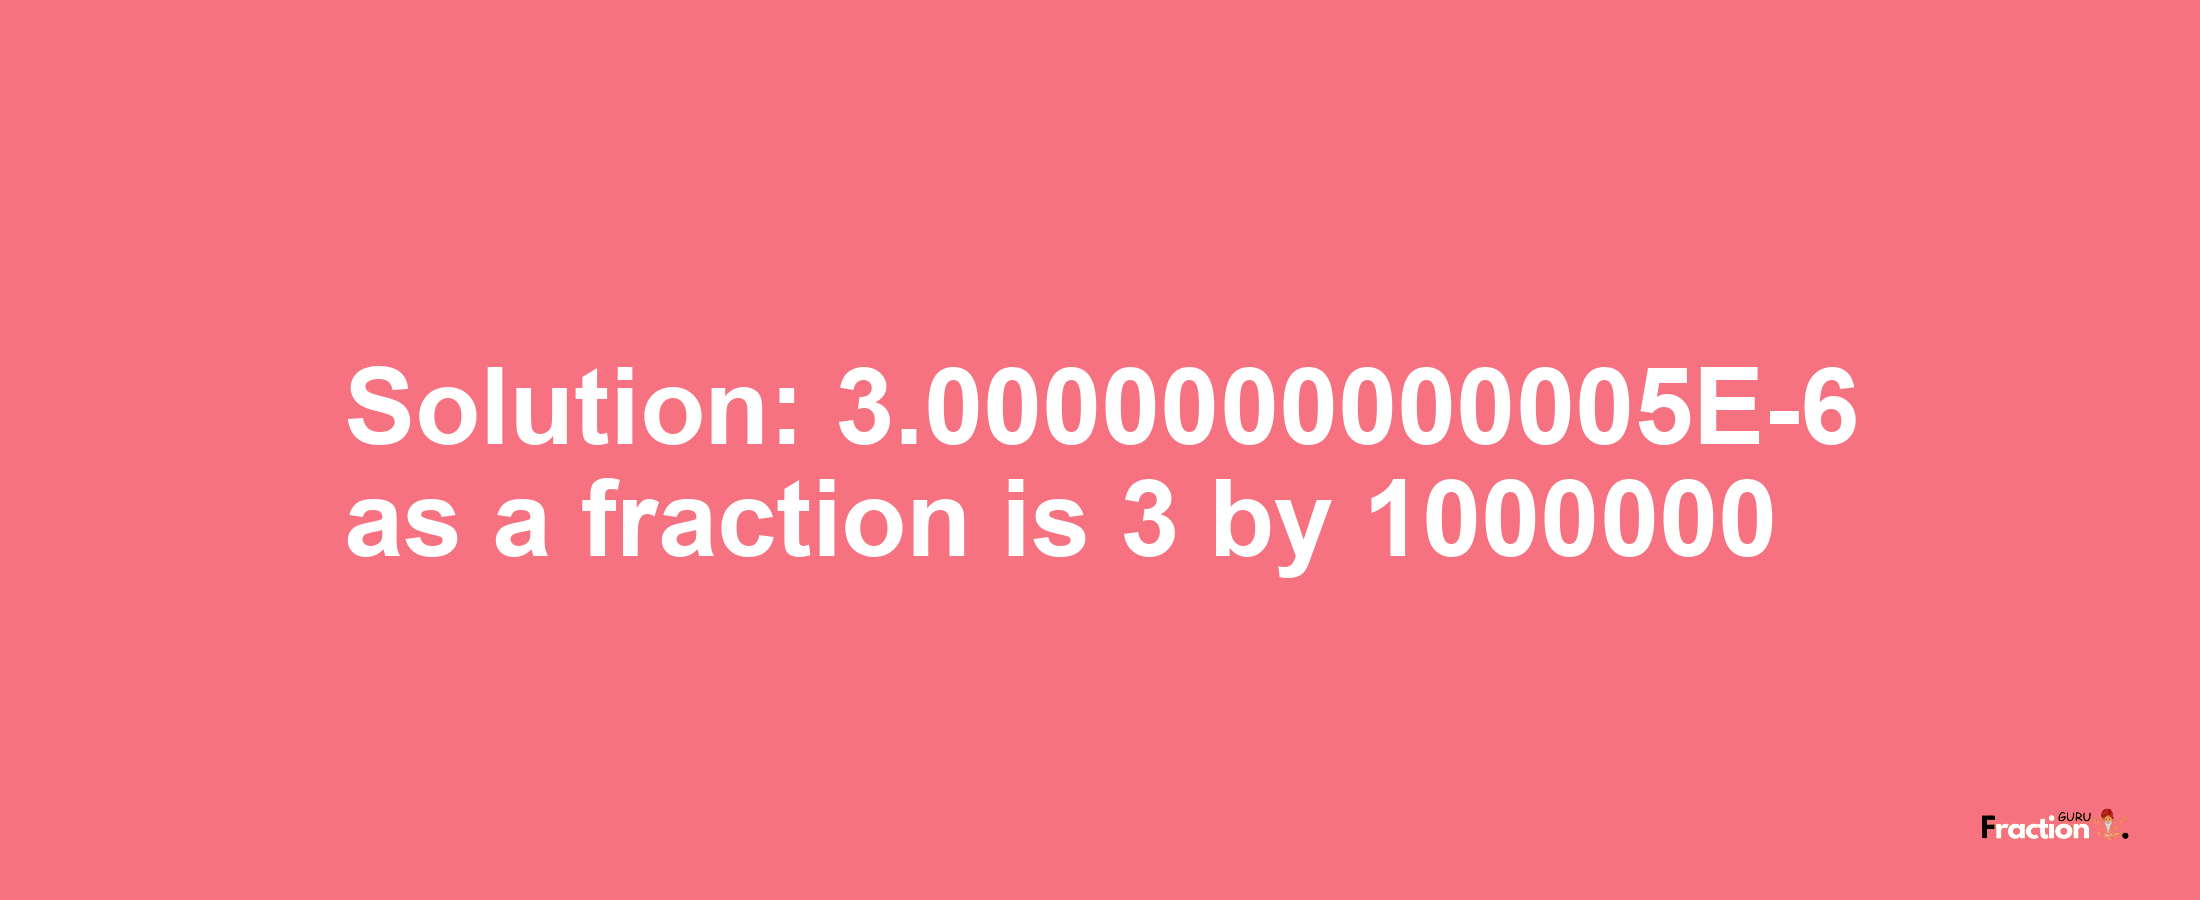 Solution:3.0000000000005E-6 as a fraction is 3/1000000